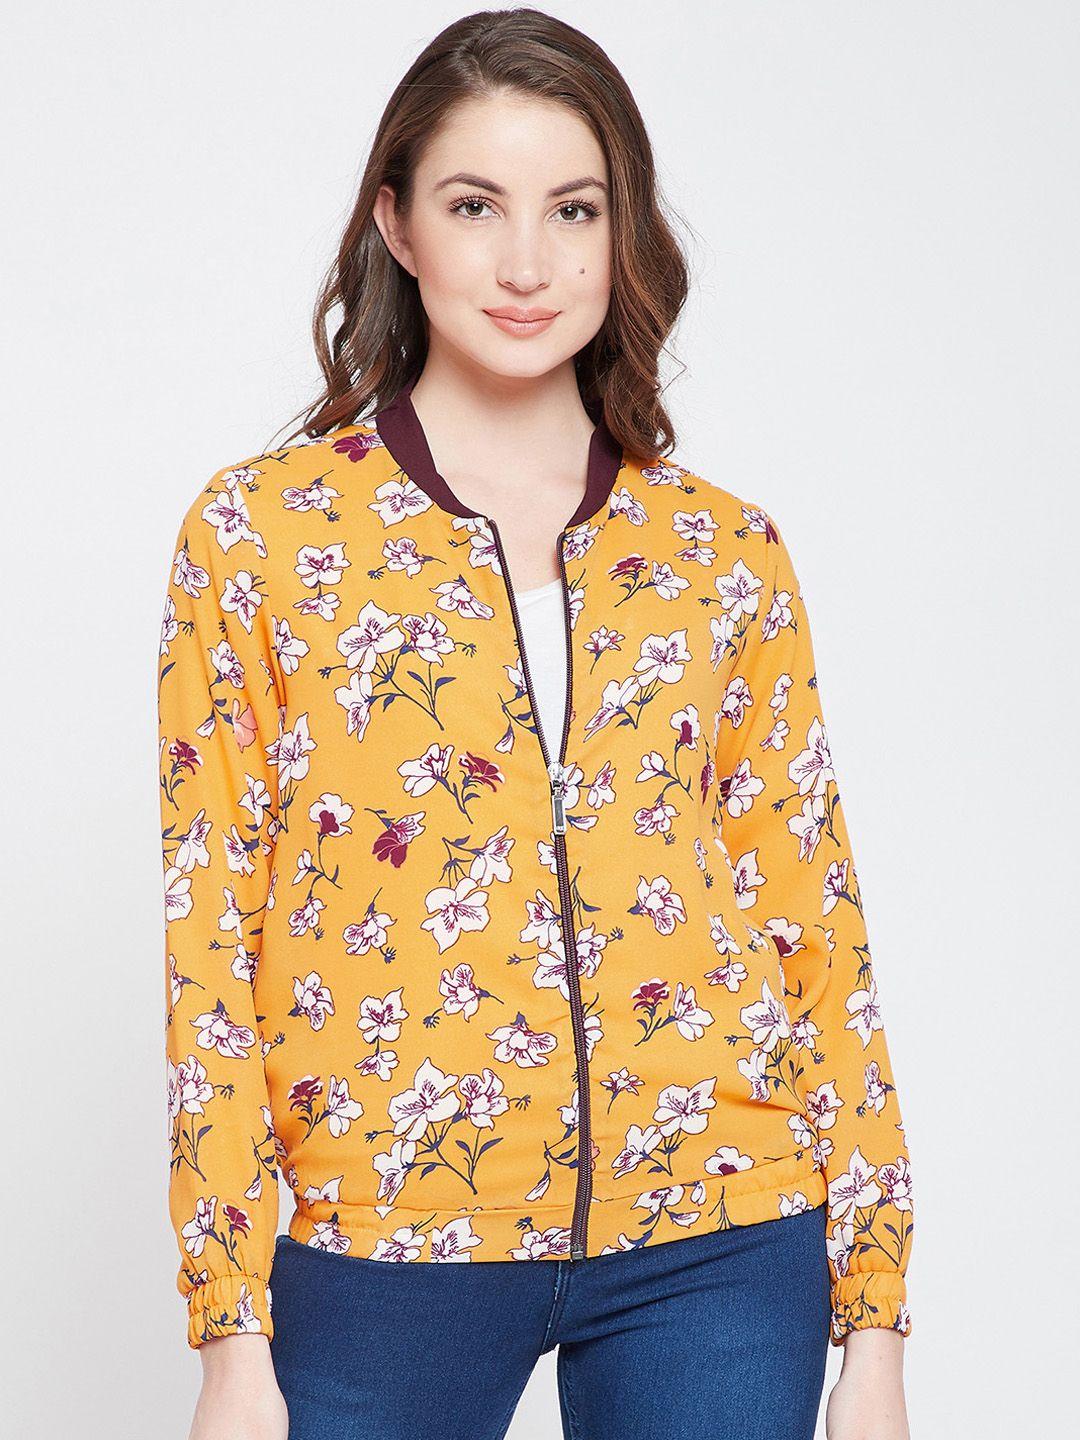 marie claire women yellow floral print bomber jacket